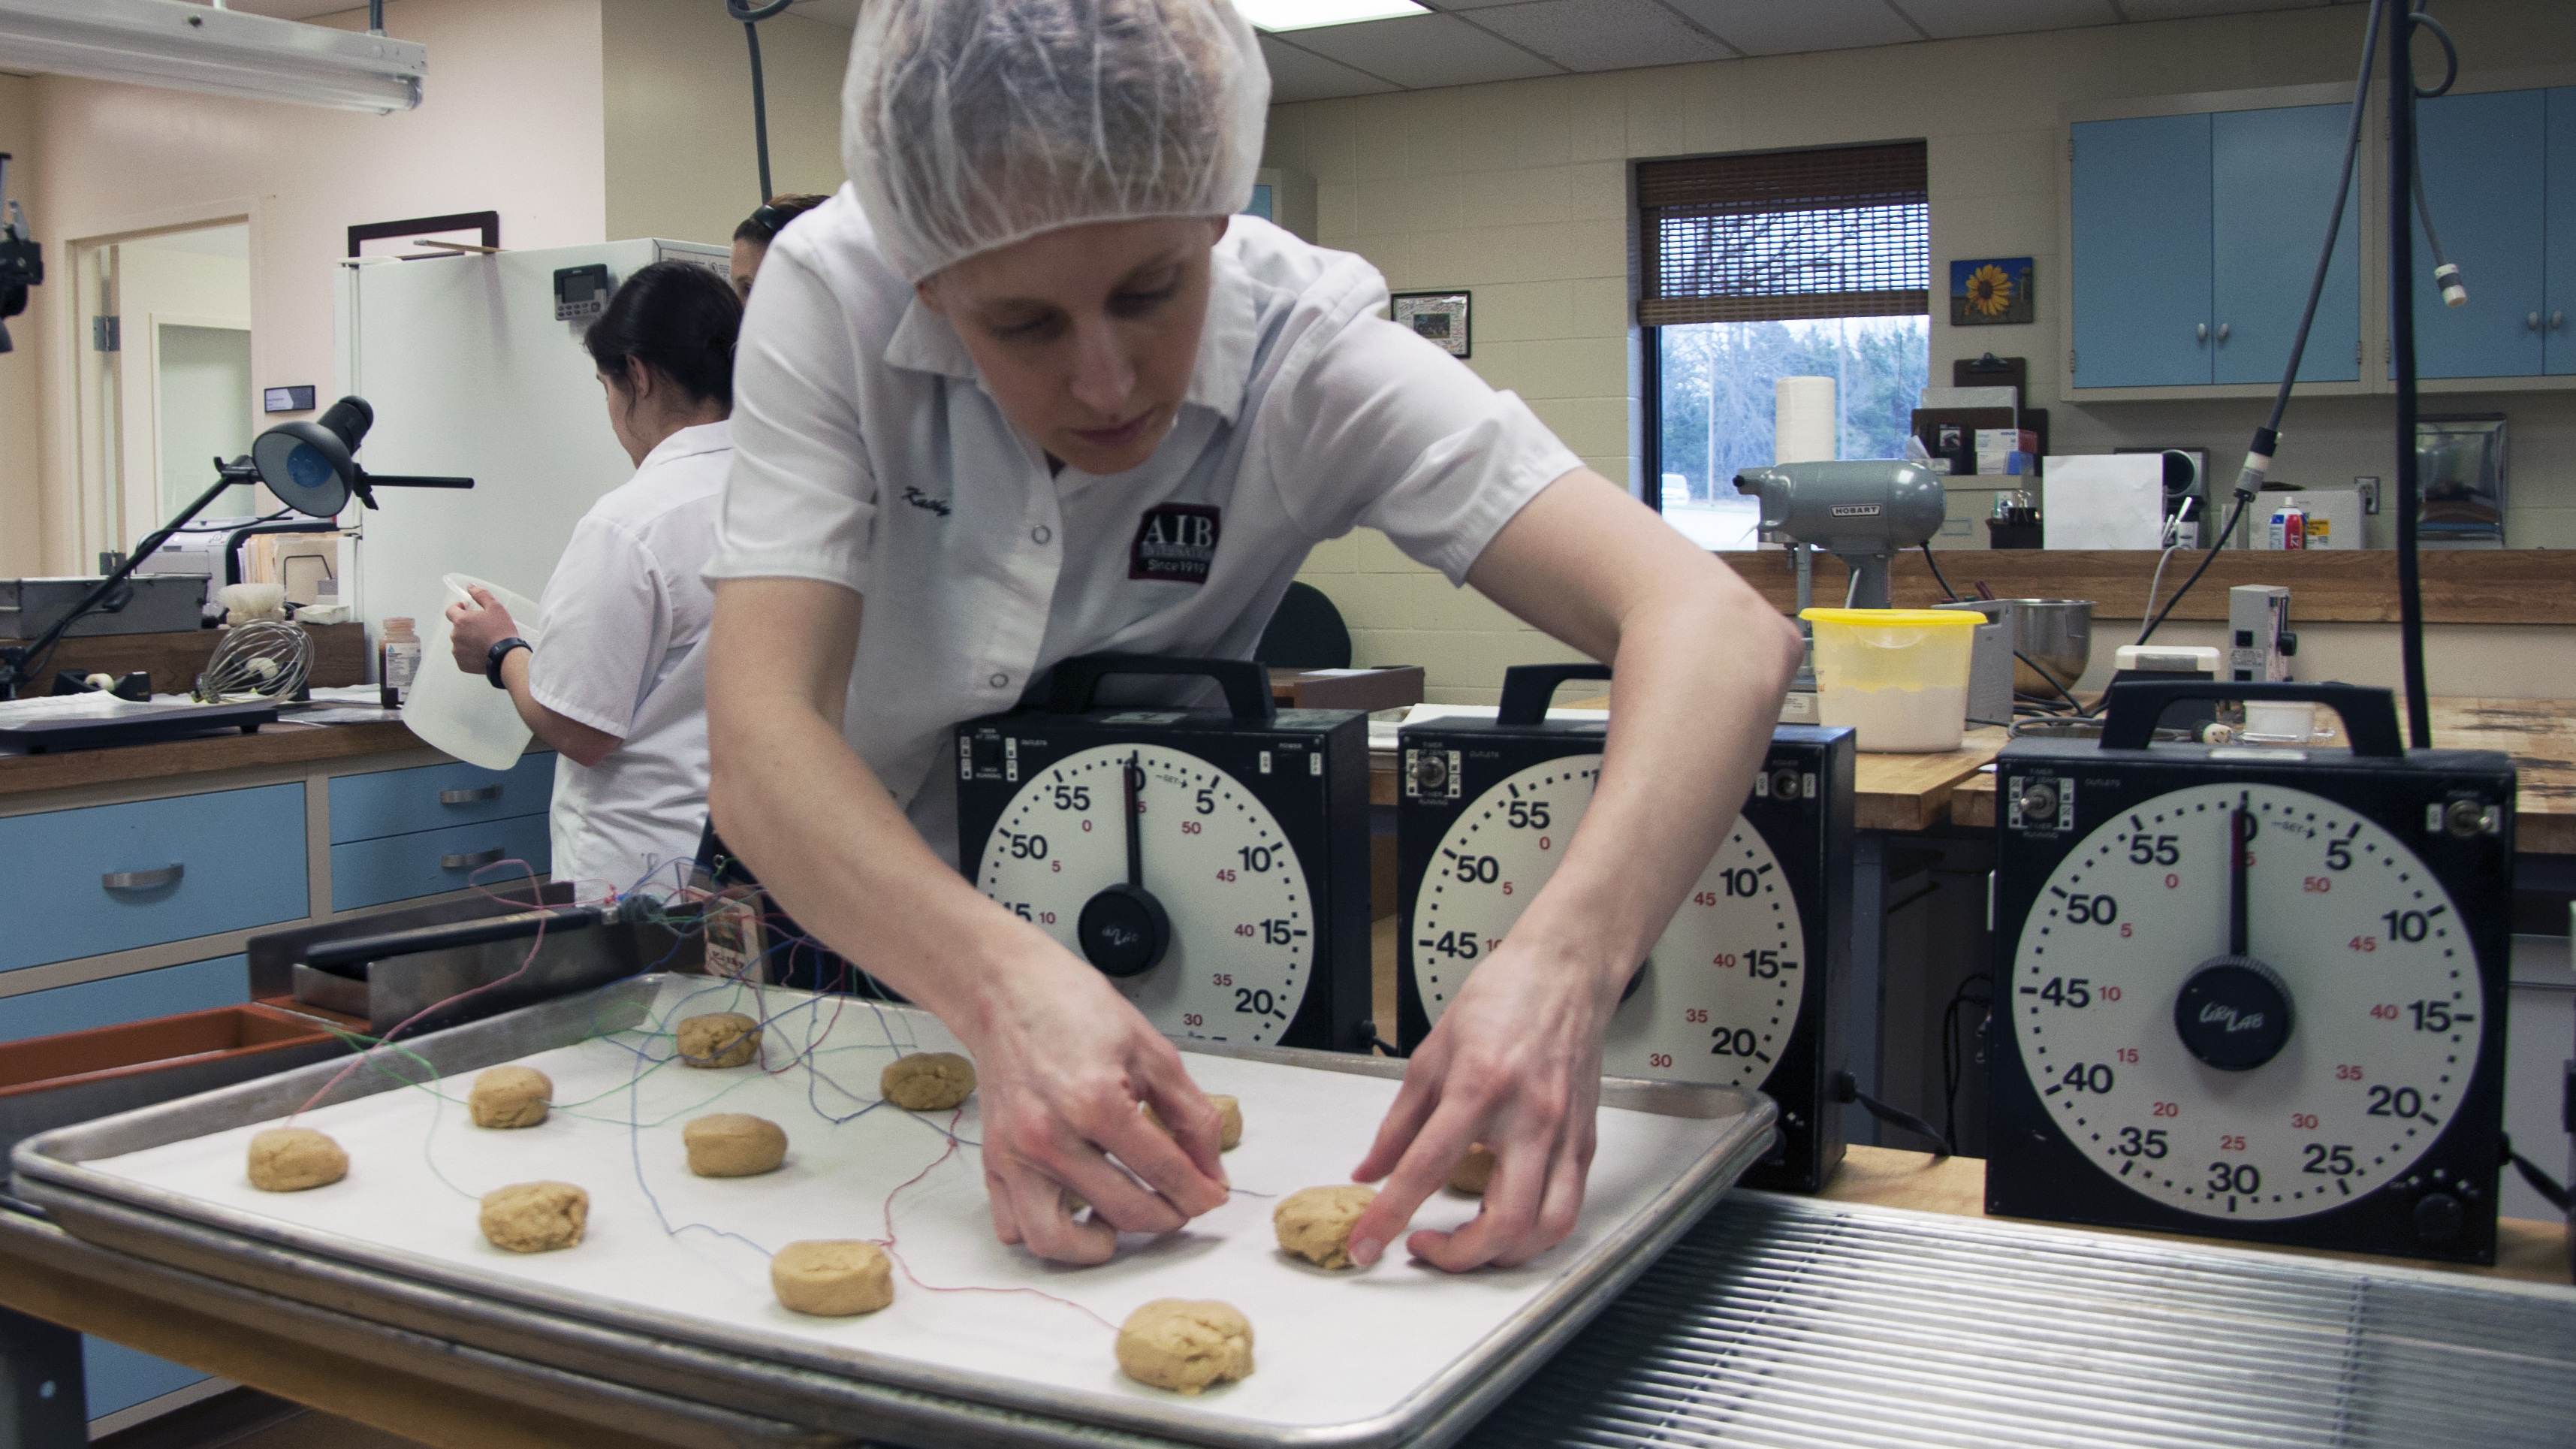 A researcher at AIB International inserts thermometers into cookie dough to monitor the baking temperature. The goal is to make sure the dough reaches the temperature needed to kill any bacteria inside.